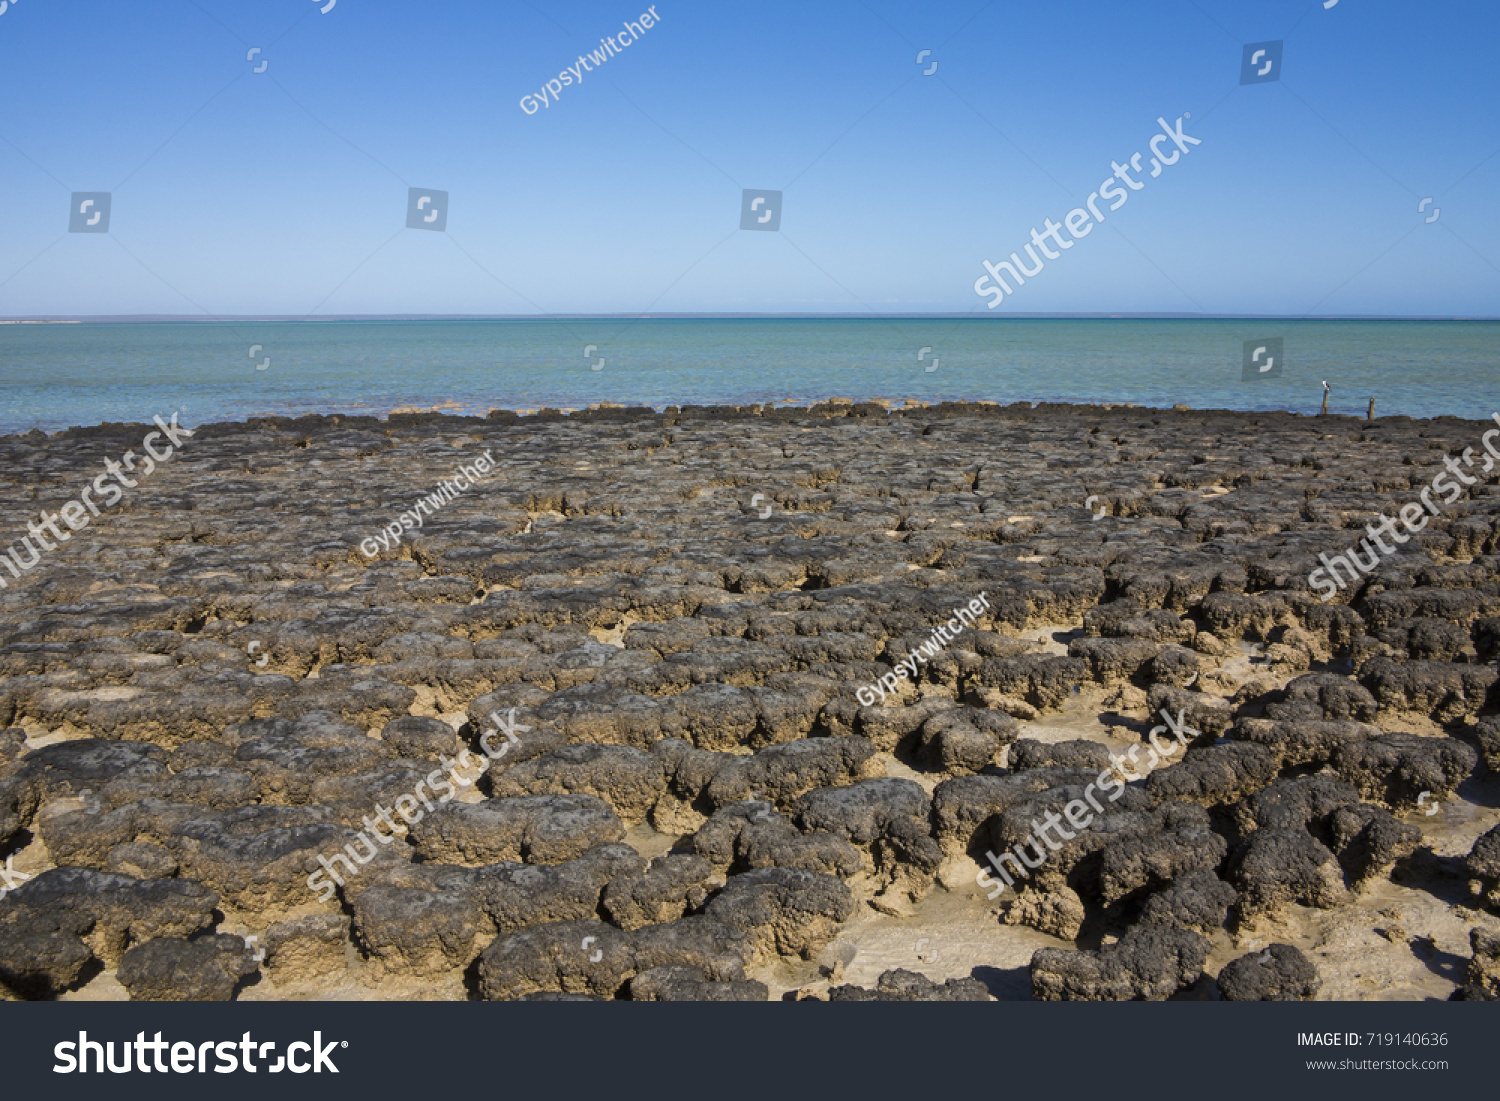 Stromatolites (Layered mounds, columns, and sheet-like sedimentary rocks. They were originally formed by the growth of layer upon layer of cyanobacteria, a single-celled photosynthesizing microbe) #719140636